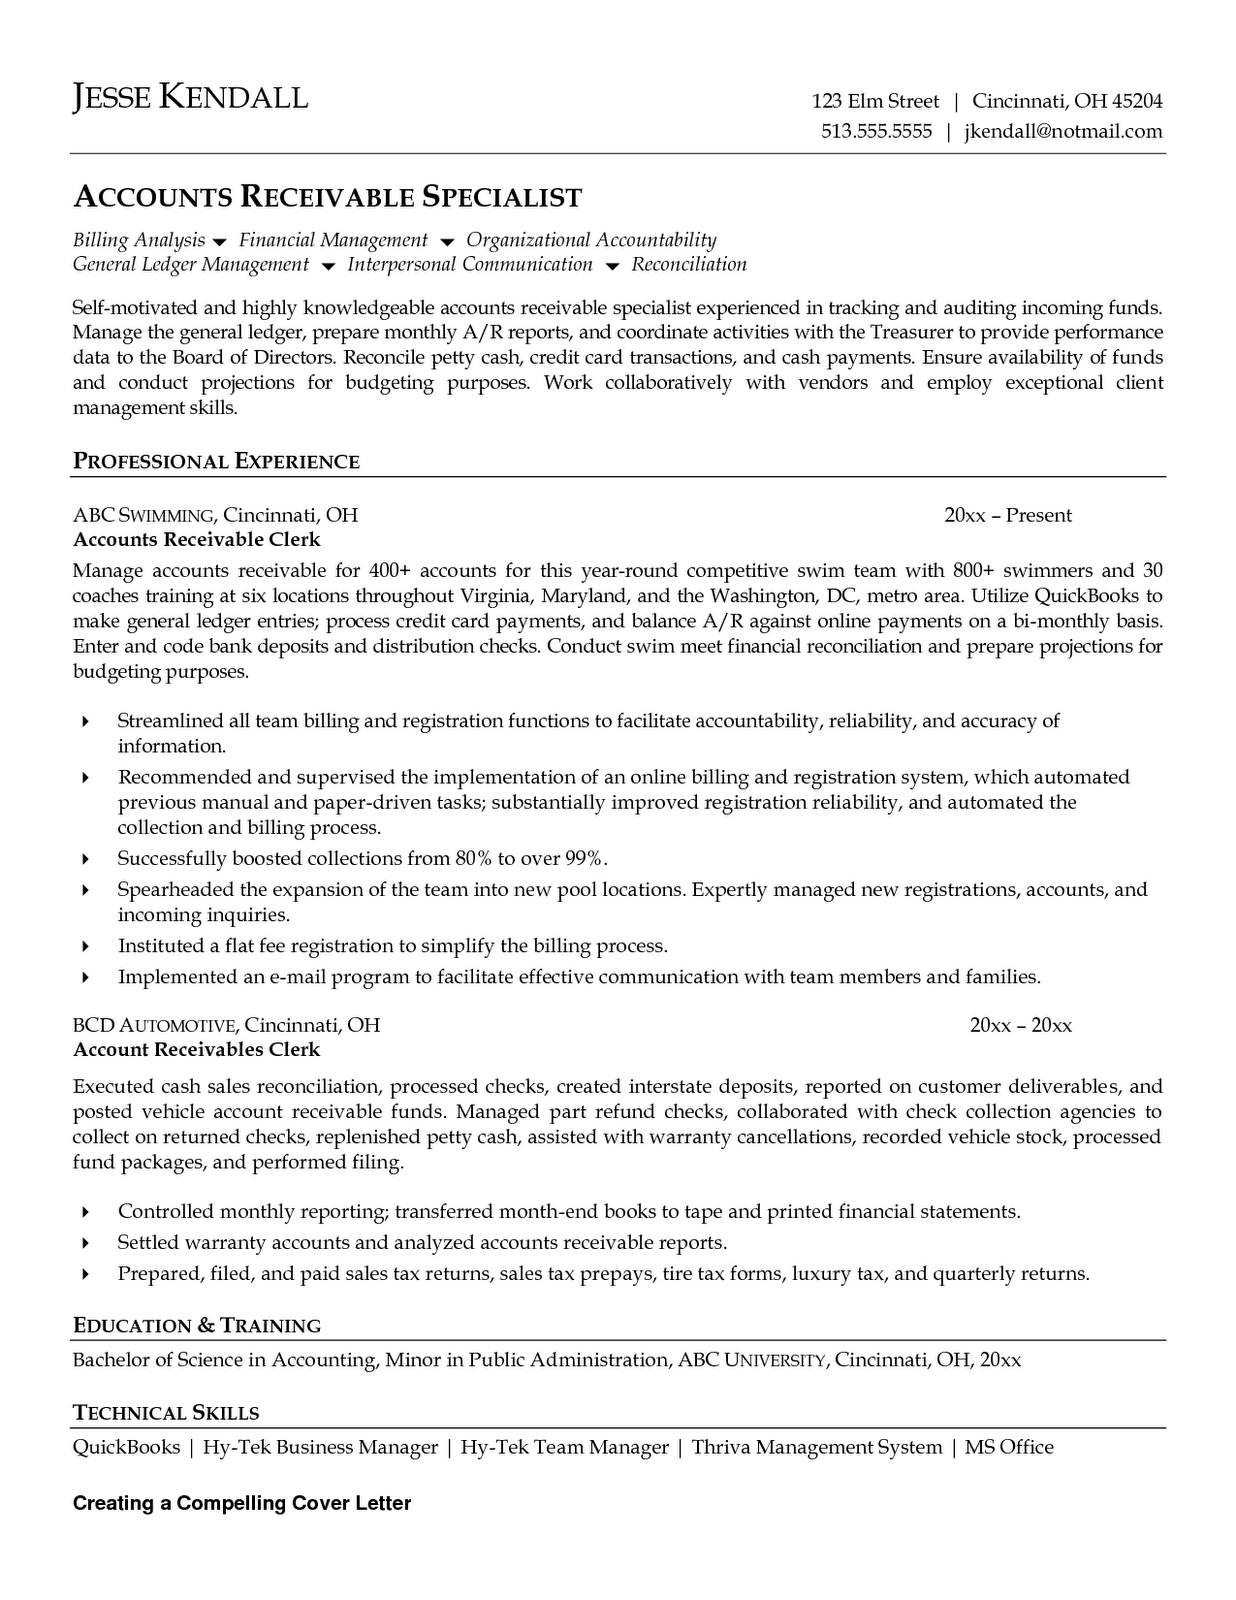 Best resume for purchase manager